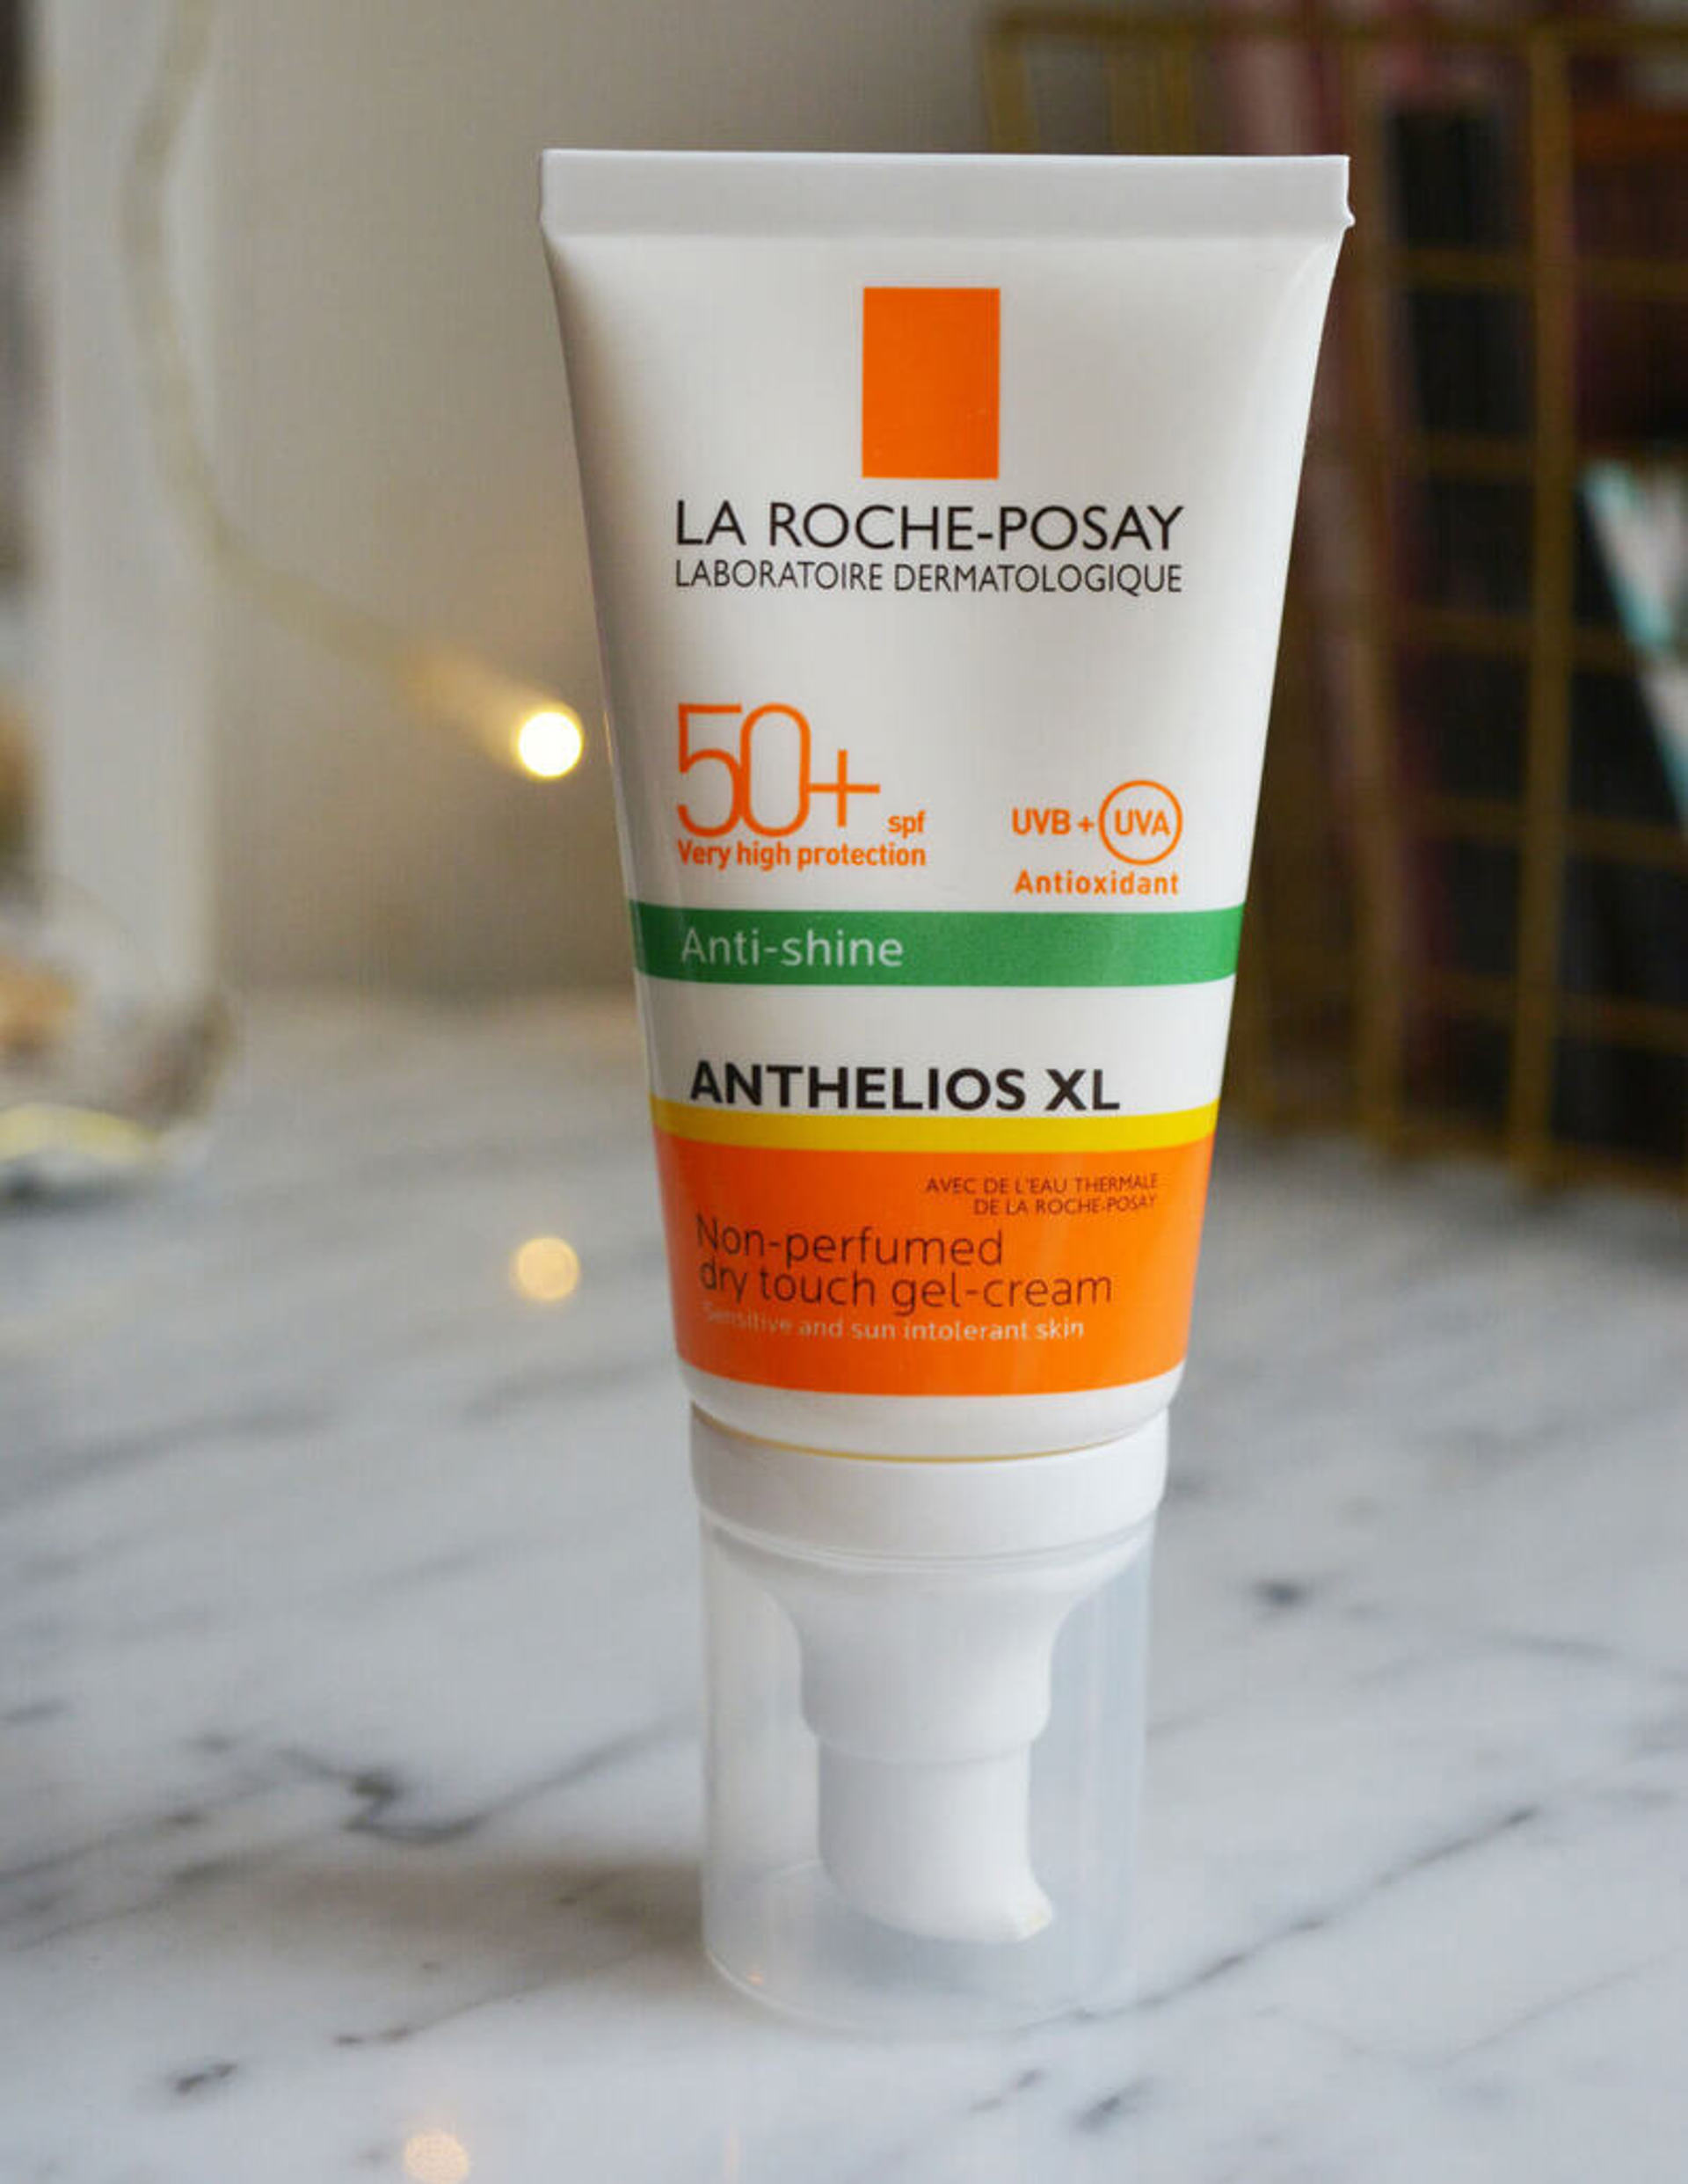 La Roche Posay Anthelios XL Dry Touch SPF 50+